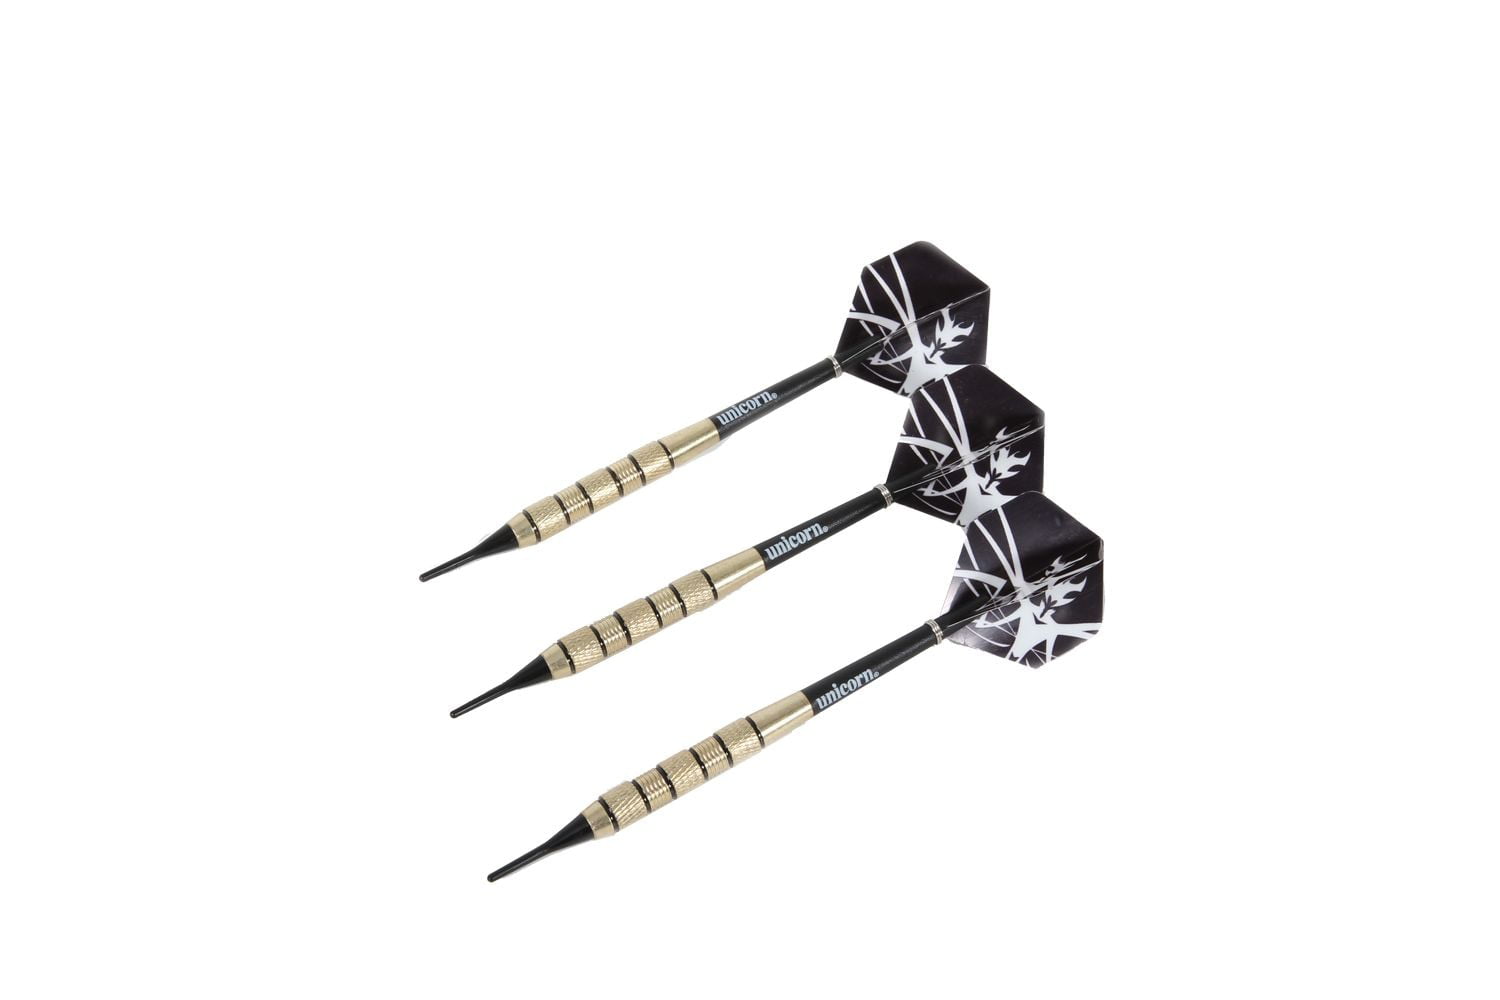 Polyester Flight Details about   Unicorn EL10 16g Soft Tip Darts New in Box Set of 3 